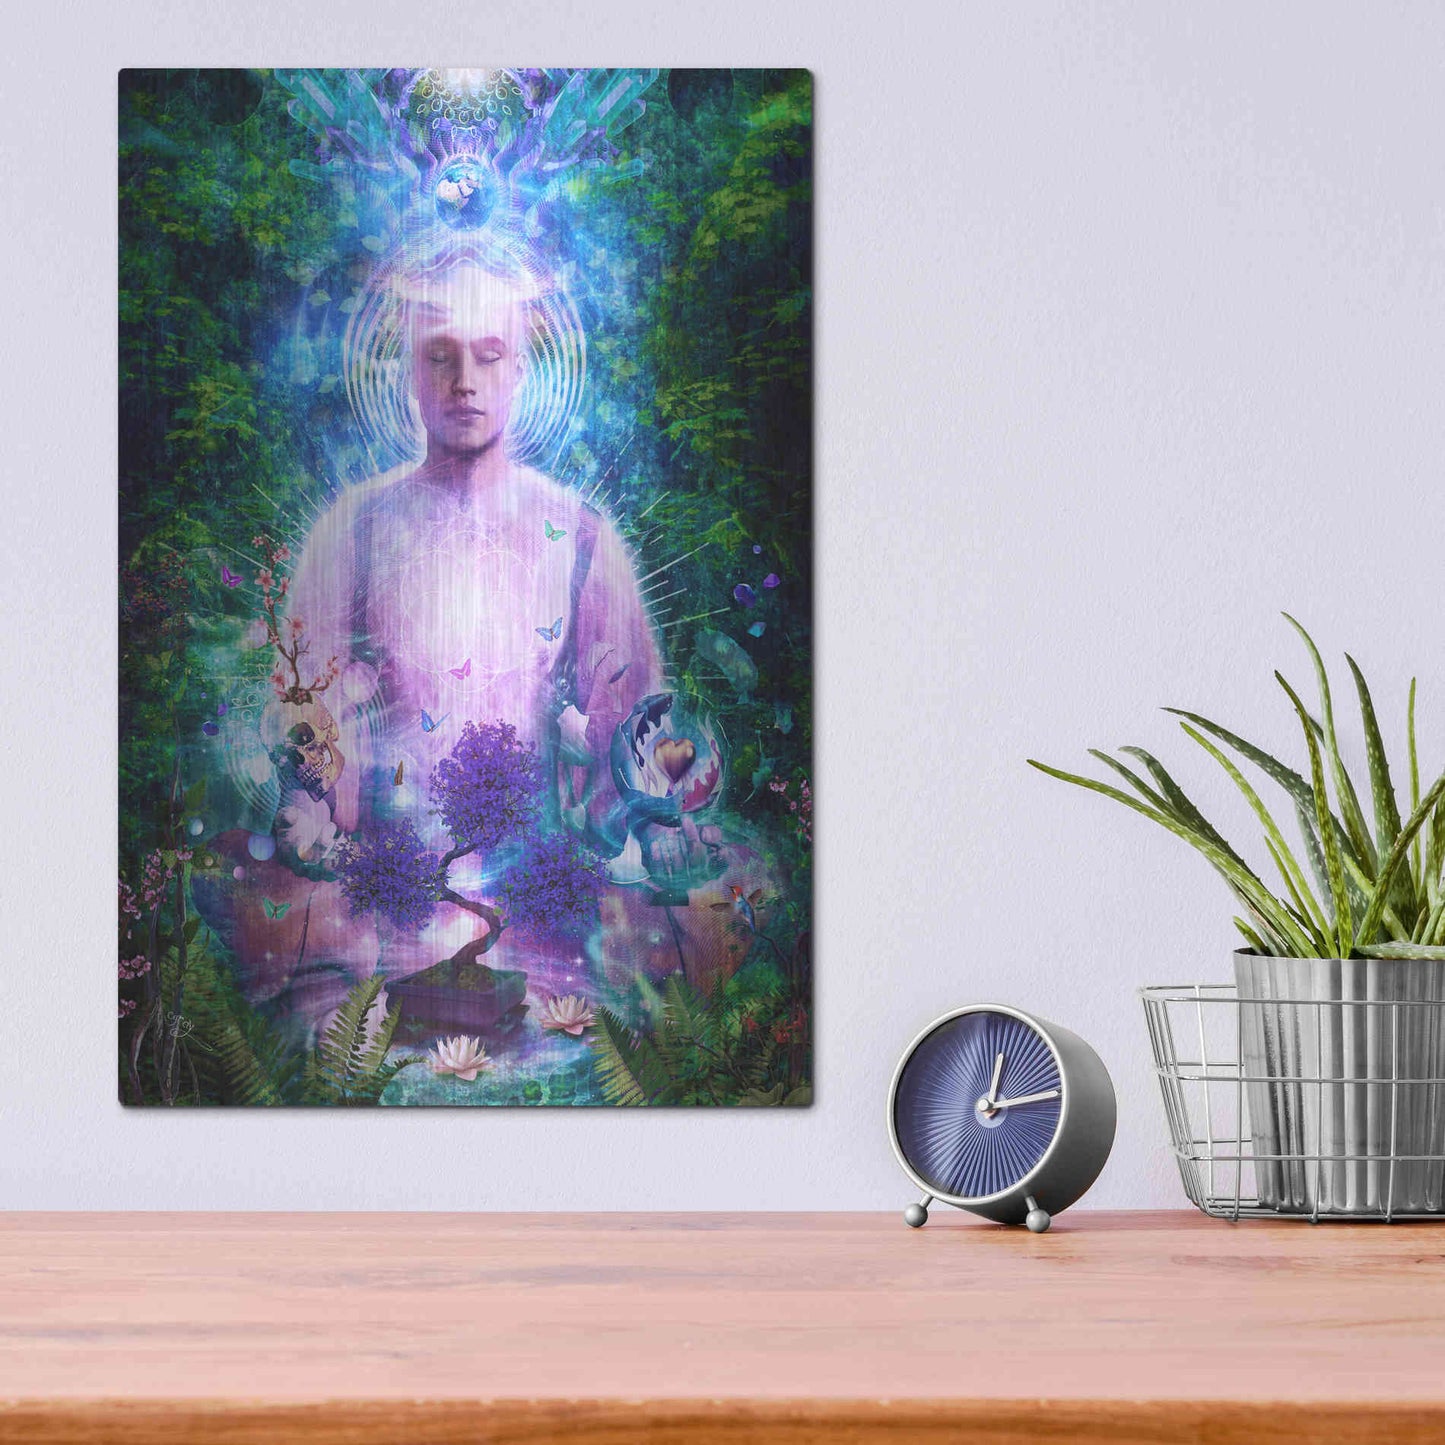 Luxe Metal Art 'Daily Meditation' by Cameron Gray Metal Wall Art,12x16